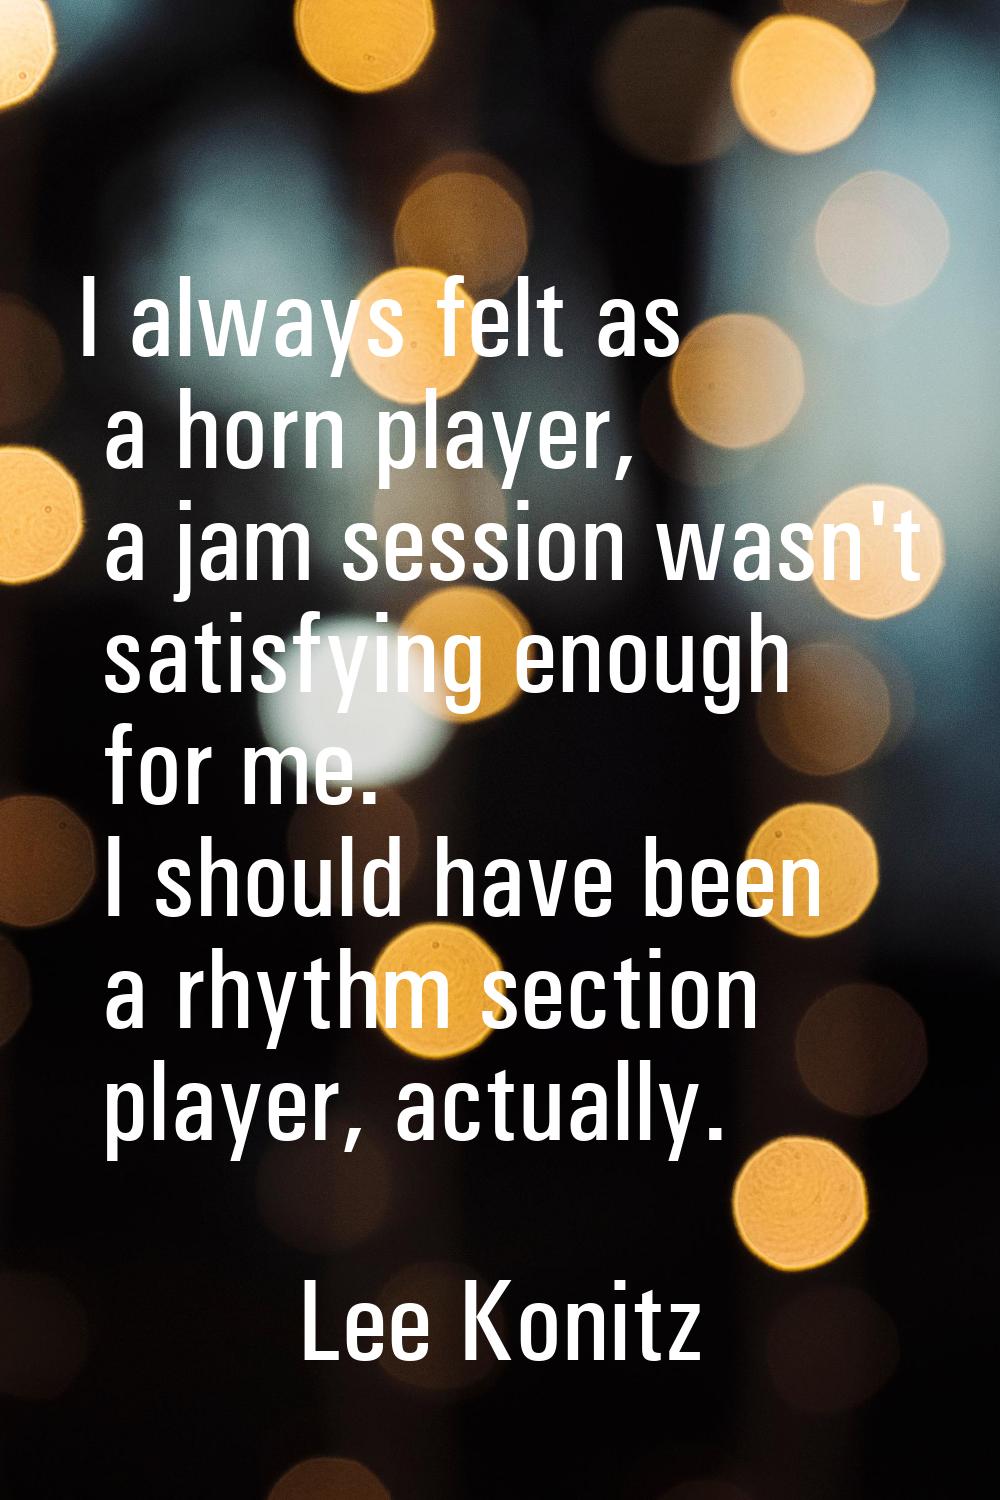 I always felt as a horn player, a jam session wasn't satisfying enough for me. I should have been a